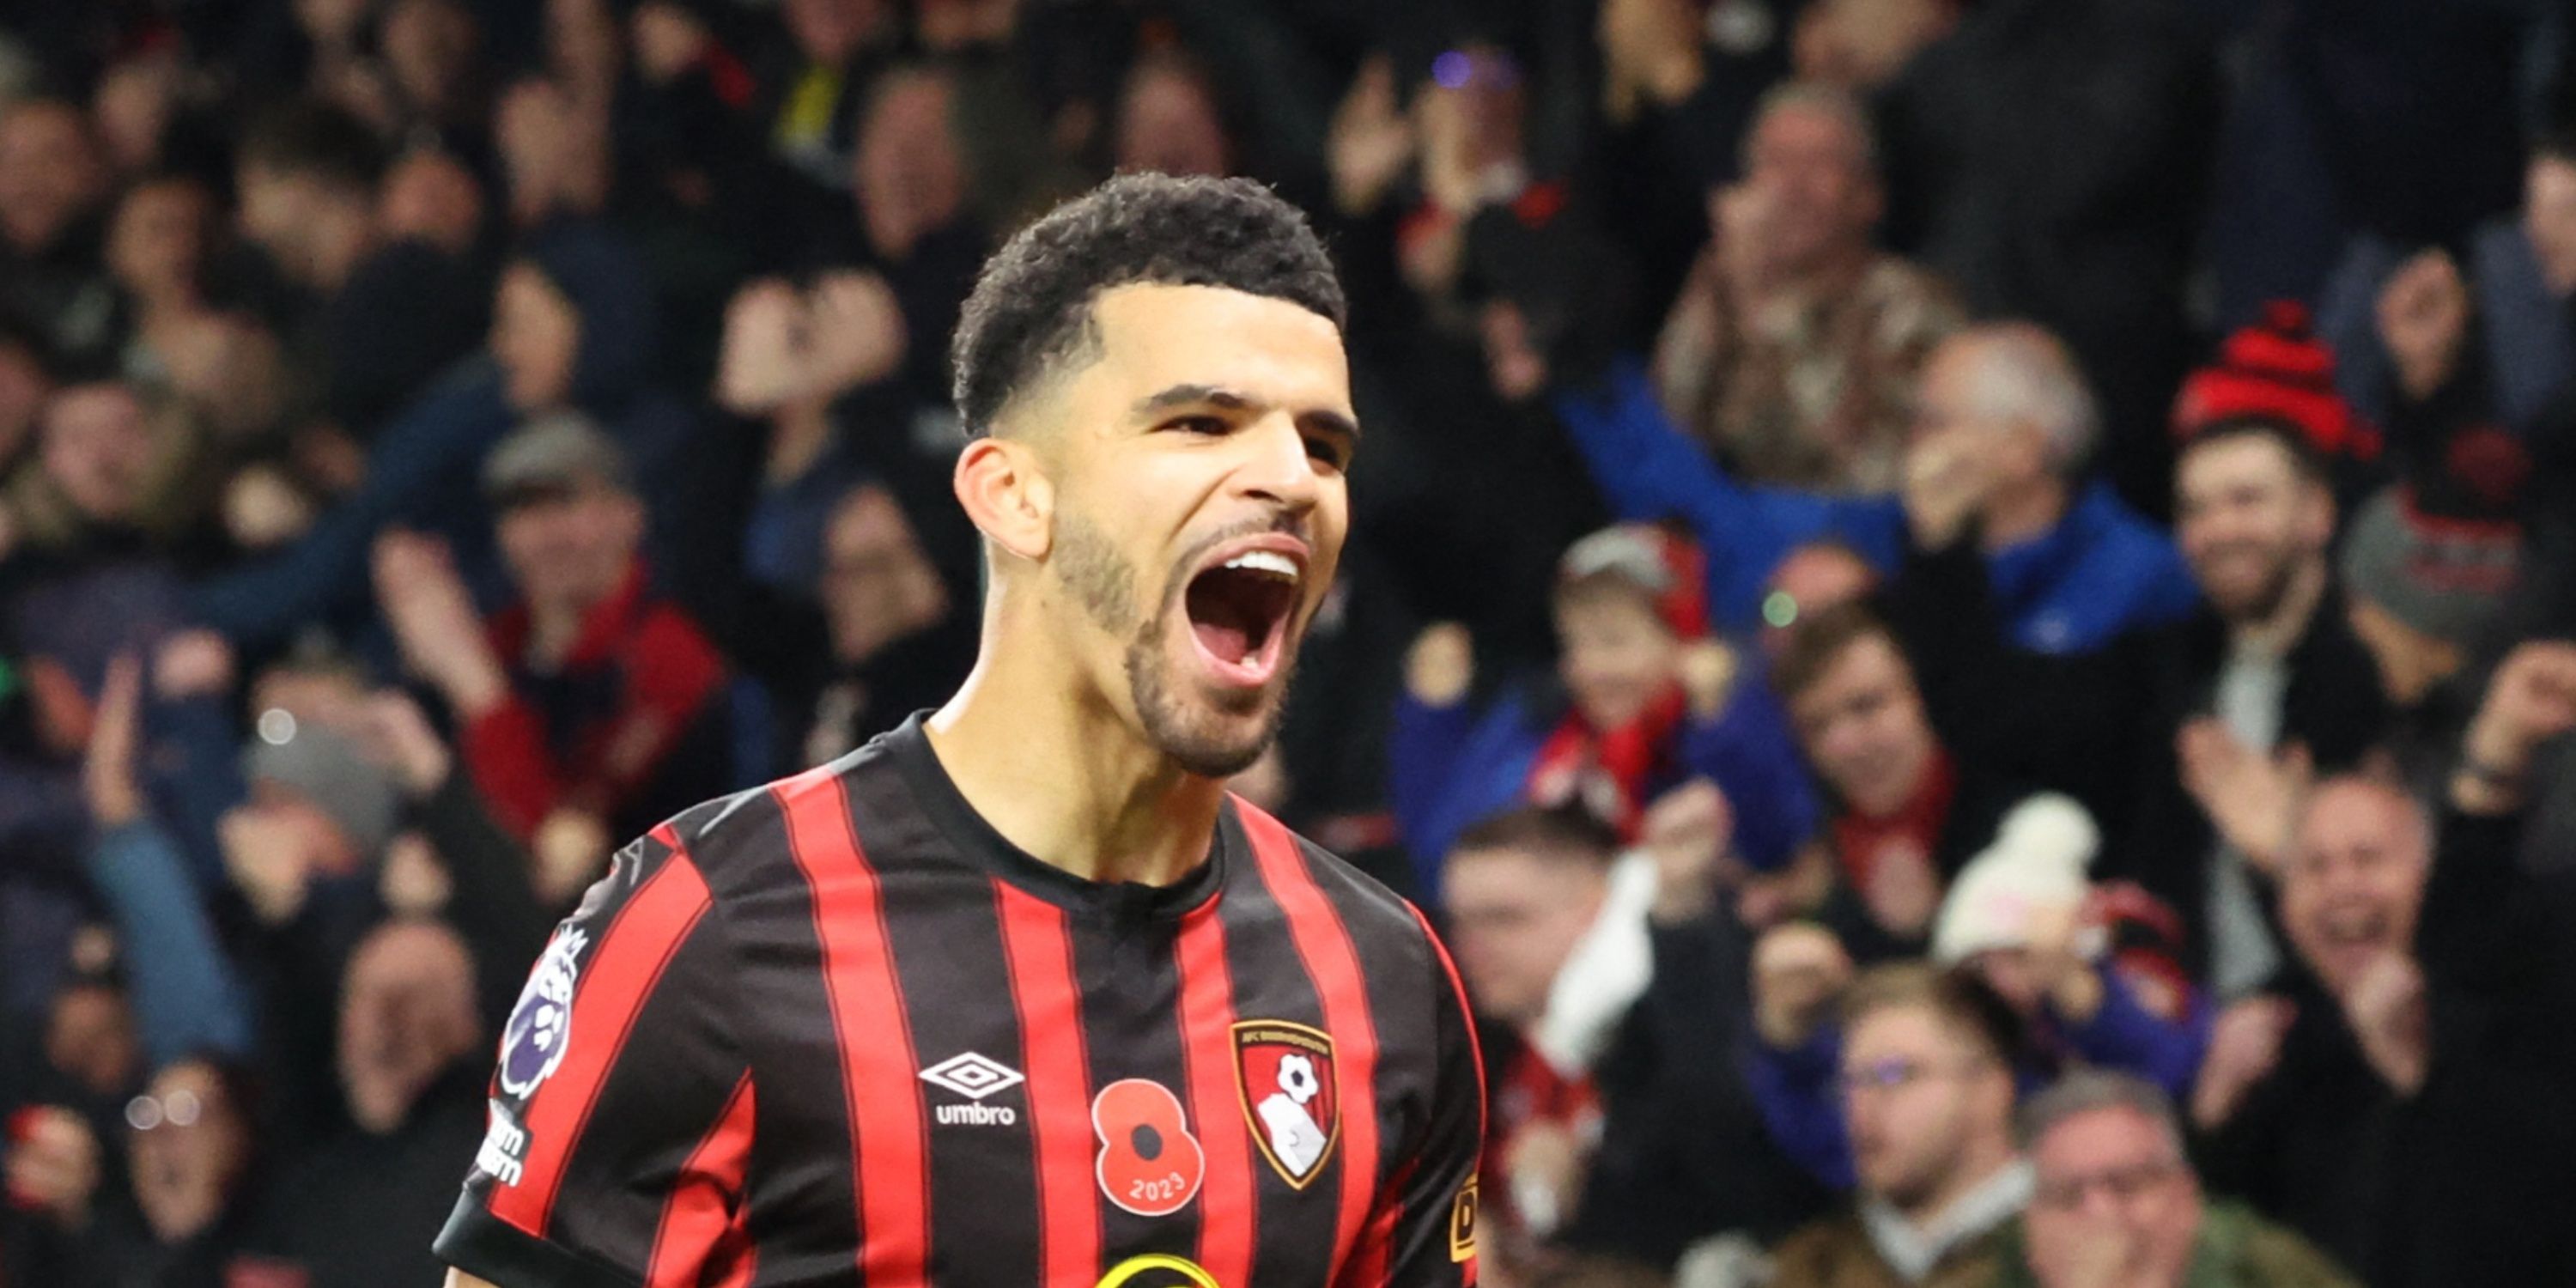 Dominic Solanke roaring in celebration of another Bournemouth goal